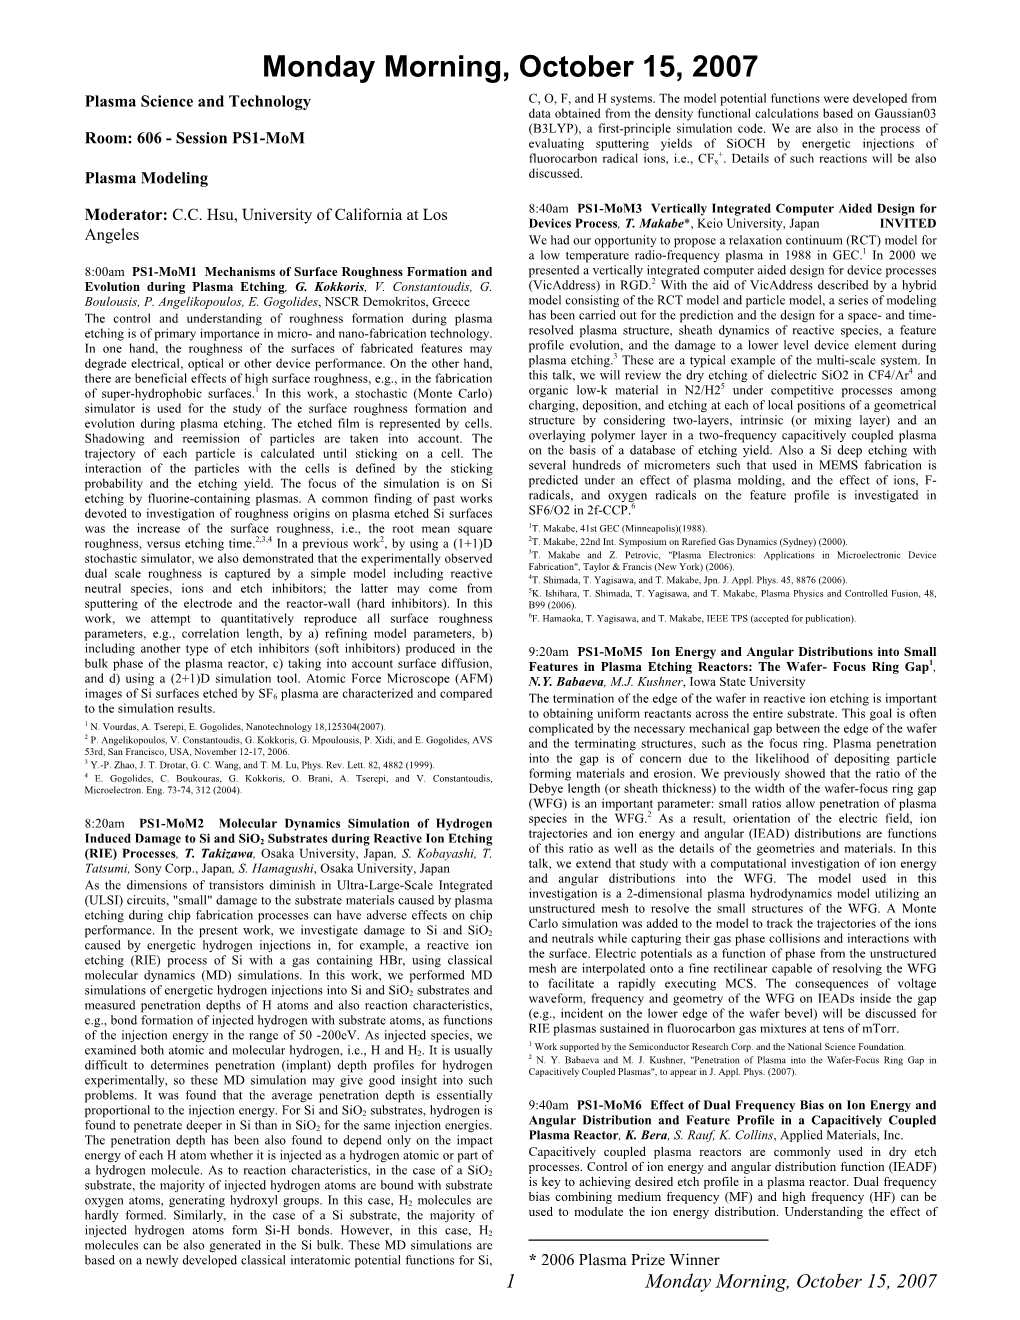 Monday Morning, October 15, 2007 Plasma Science and Technology C, O, F, and H Systems